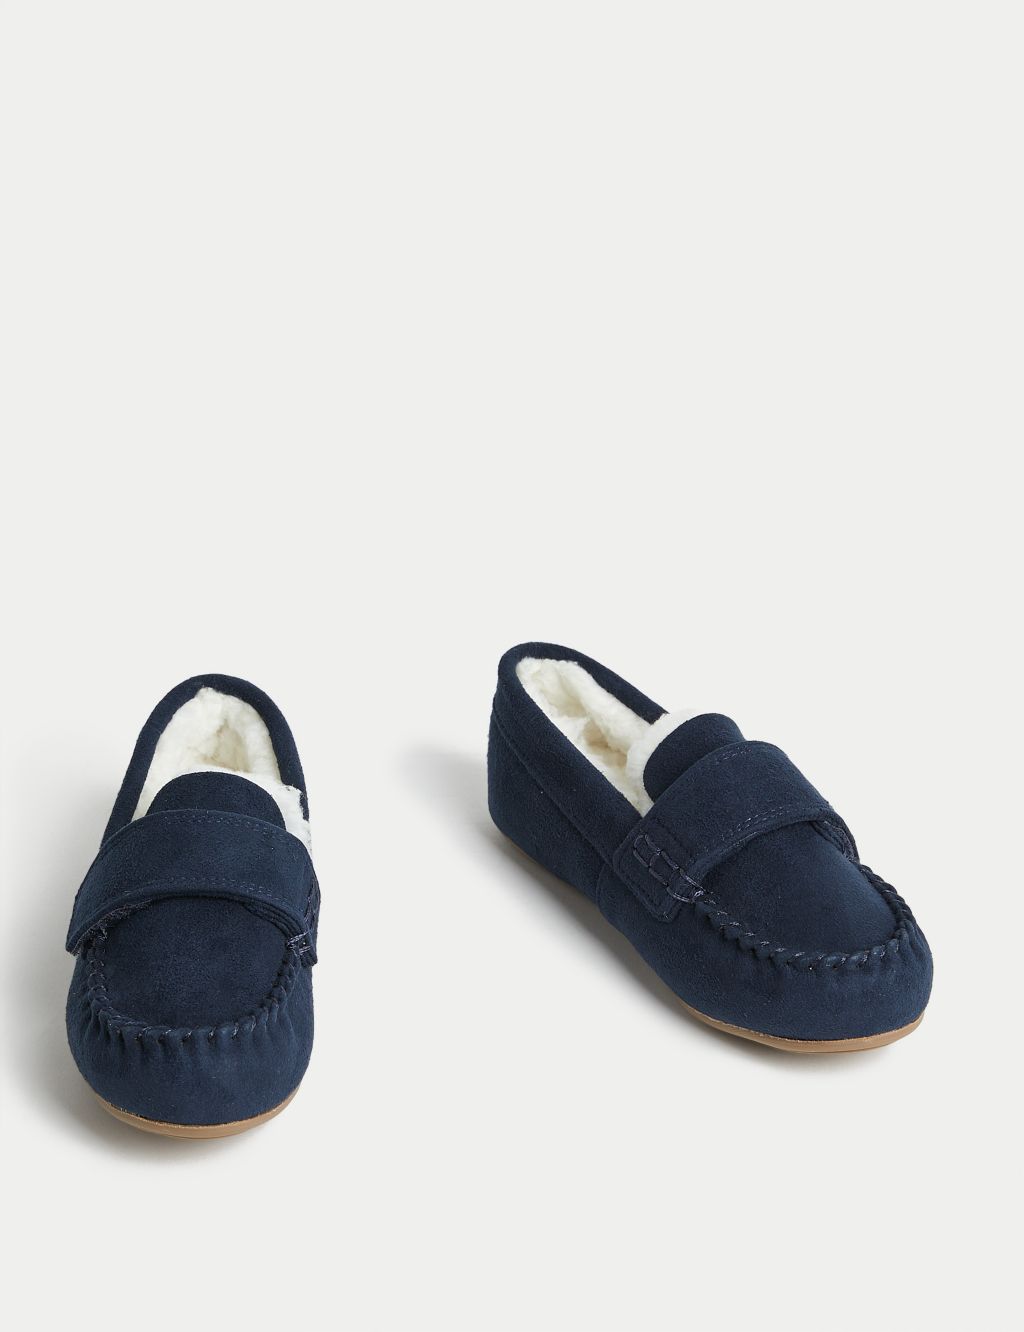 Kids' Riptape Moccasin Slippers (4 Small - 12 Small) image 2